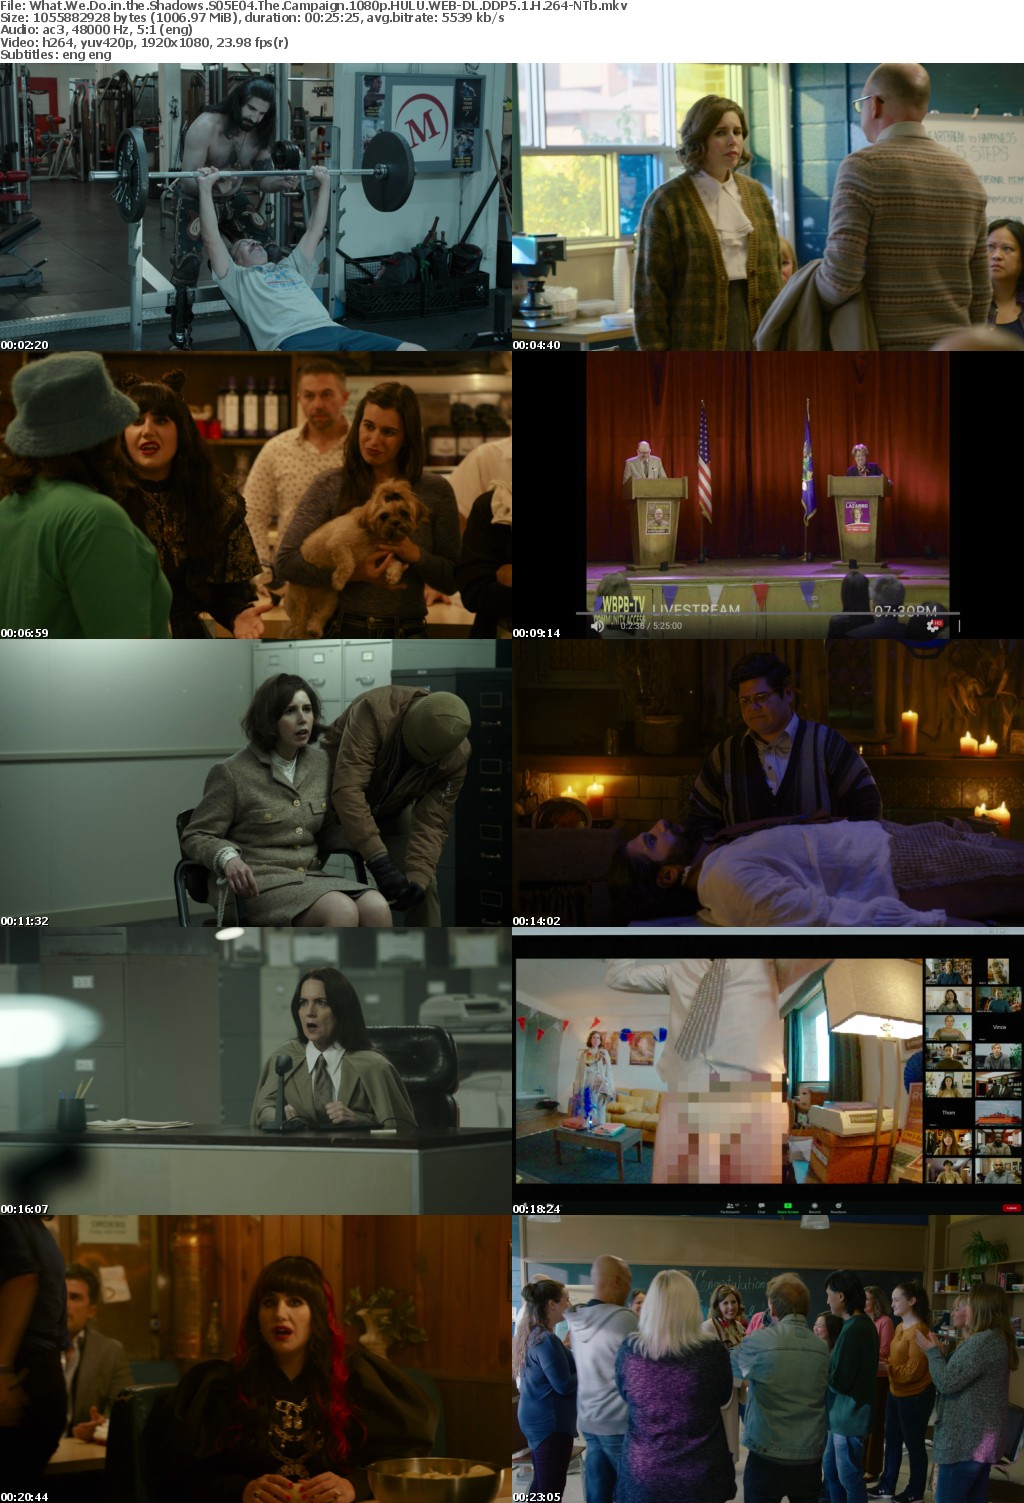 What We Do in the Shadows S05E04 The Campaign 1080p HULU WEB-DL DDP5 1 H 264-NTb